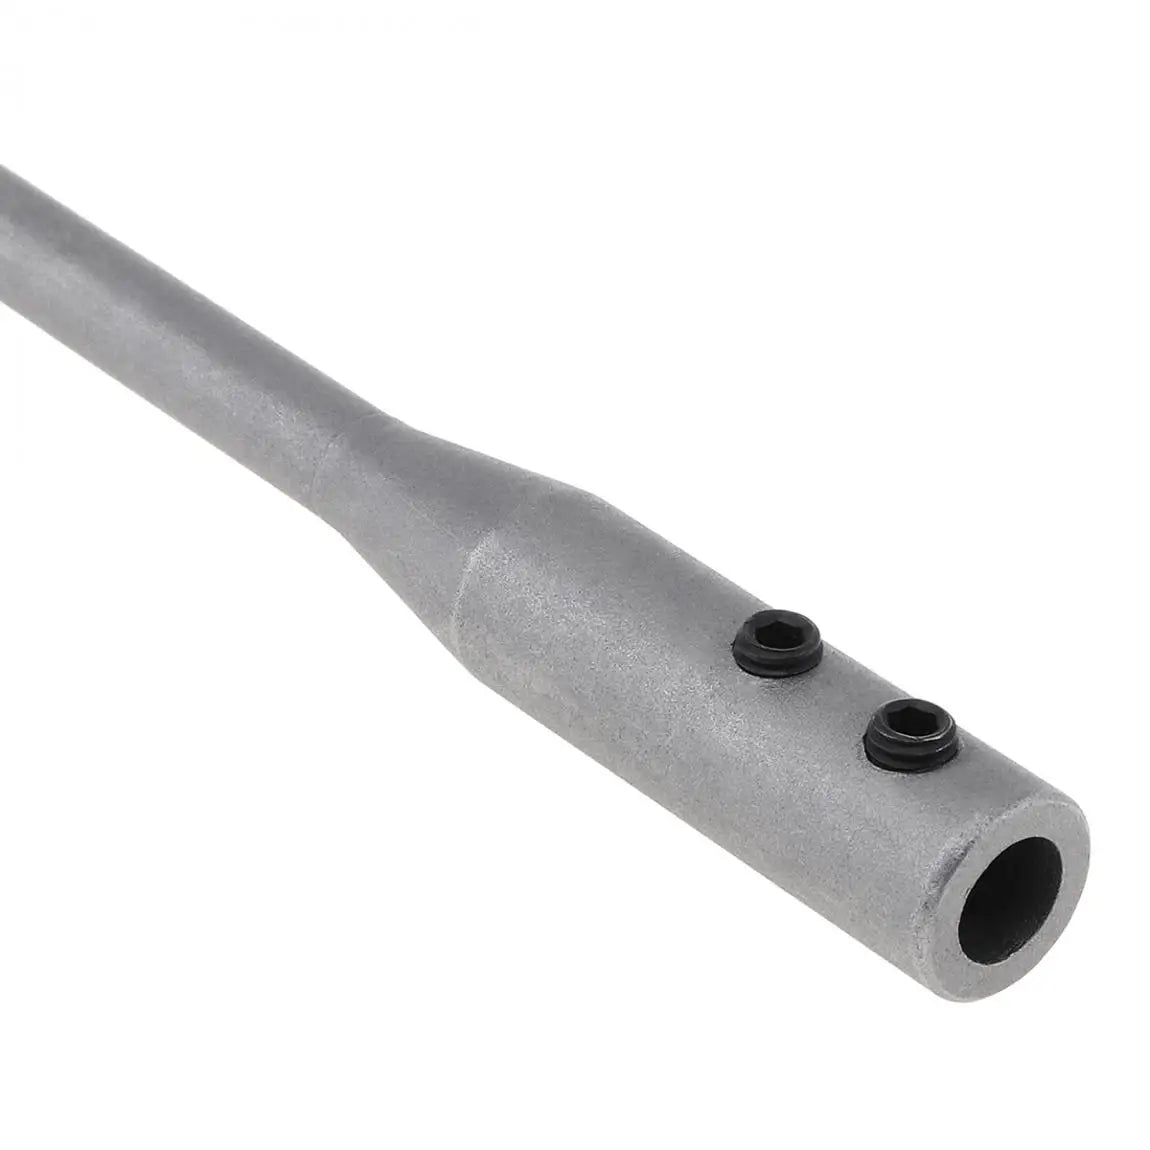 150mm Fit For Flat Drill Bit Deep Hole Shaft Hex Extention Holder Connect Rod Tools